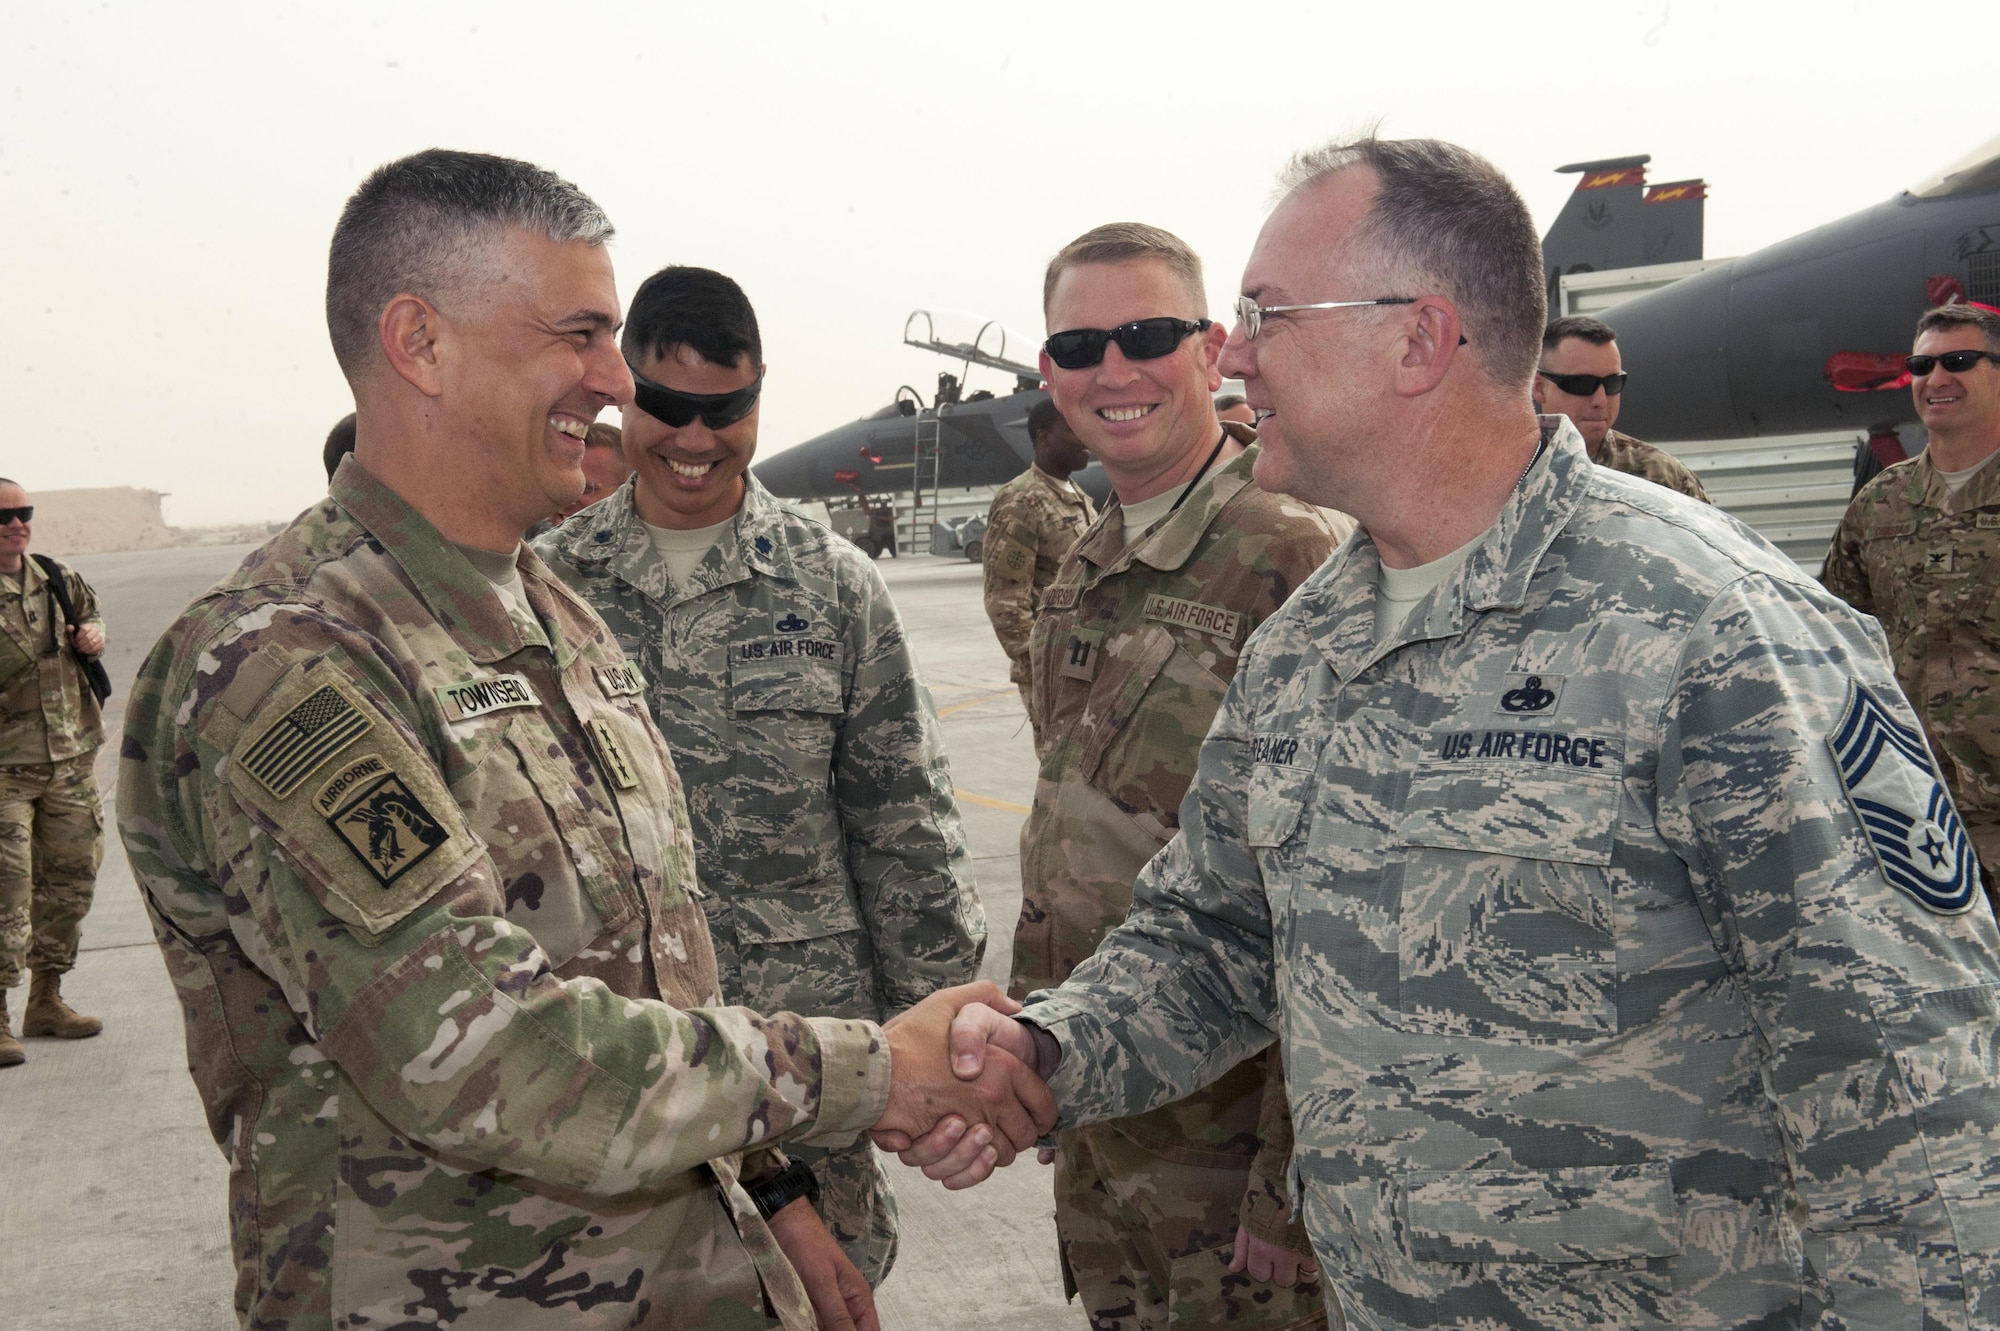 U.S. Army Lt. Gen. Stephen Townsend, Combined Joint Task Force – Operation Inherent Resolve commanding general, shakes hands with U.S. Air Force Chief Master Sgt. Raymond Phreaner, 332nd Expeditionary Maintenance Squadron, chief enlisted manager April 5, 2017, in Southwest Asia. The general visited Airmen and Soldiers thanking them for their contribution to the mission. (U.S. Air Force photo by Tech Sgt. Eboni Reams)